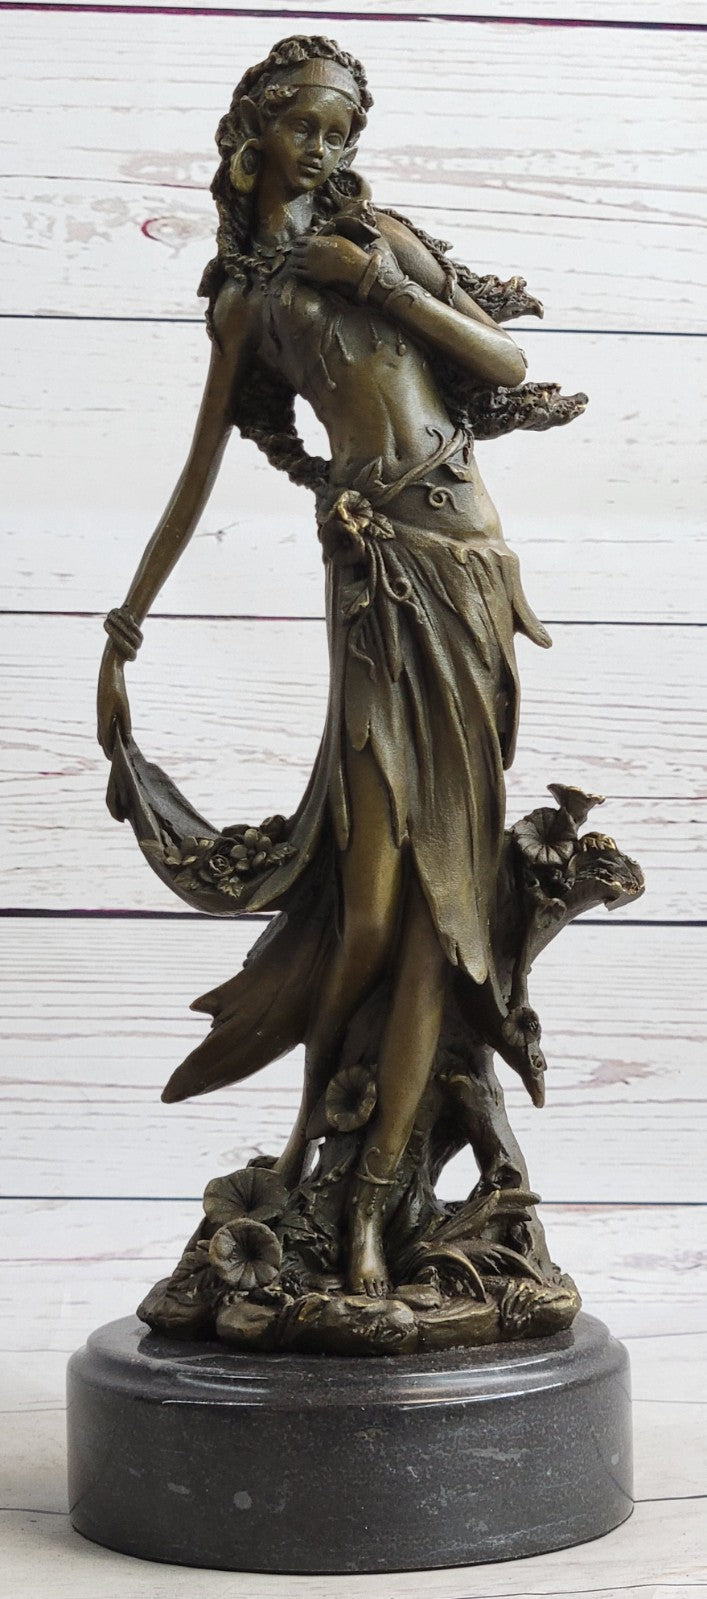 Girl With Angelic Face Bronze Figurine Signed Kassin Art Nouveau Sculpture Gift